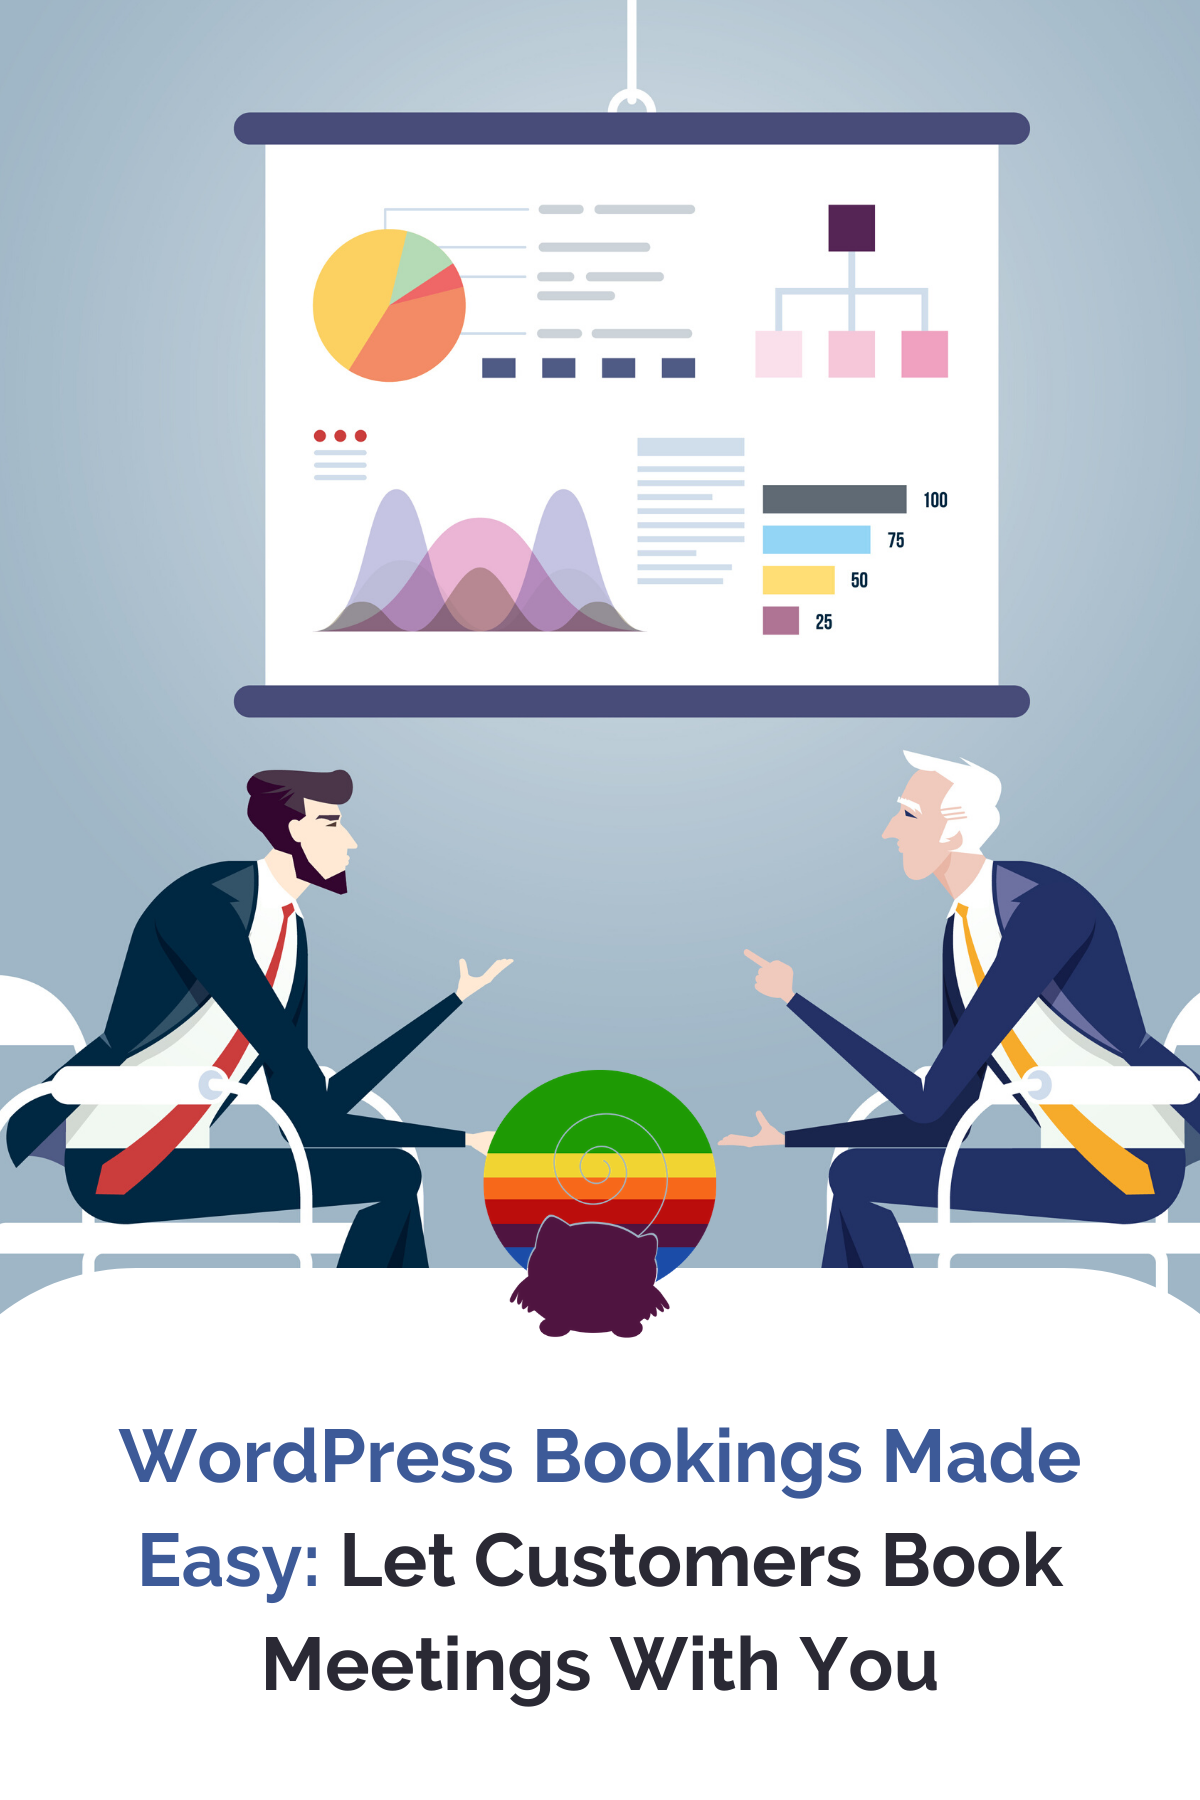 WordPress Bookings Made Easy. Let Customers Book Meetings with You